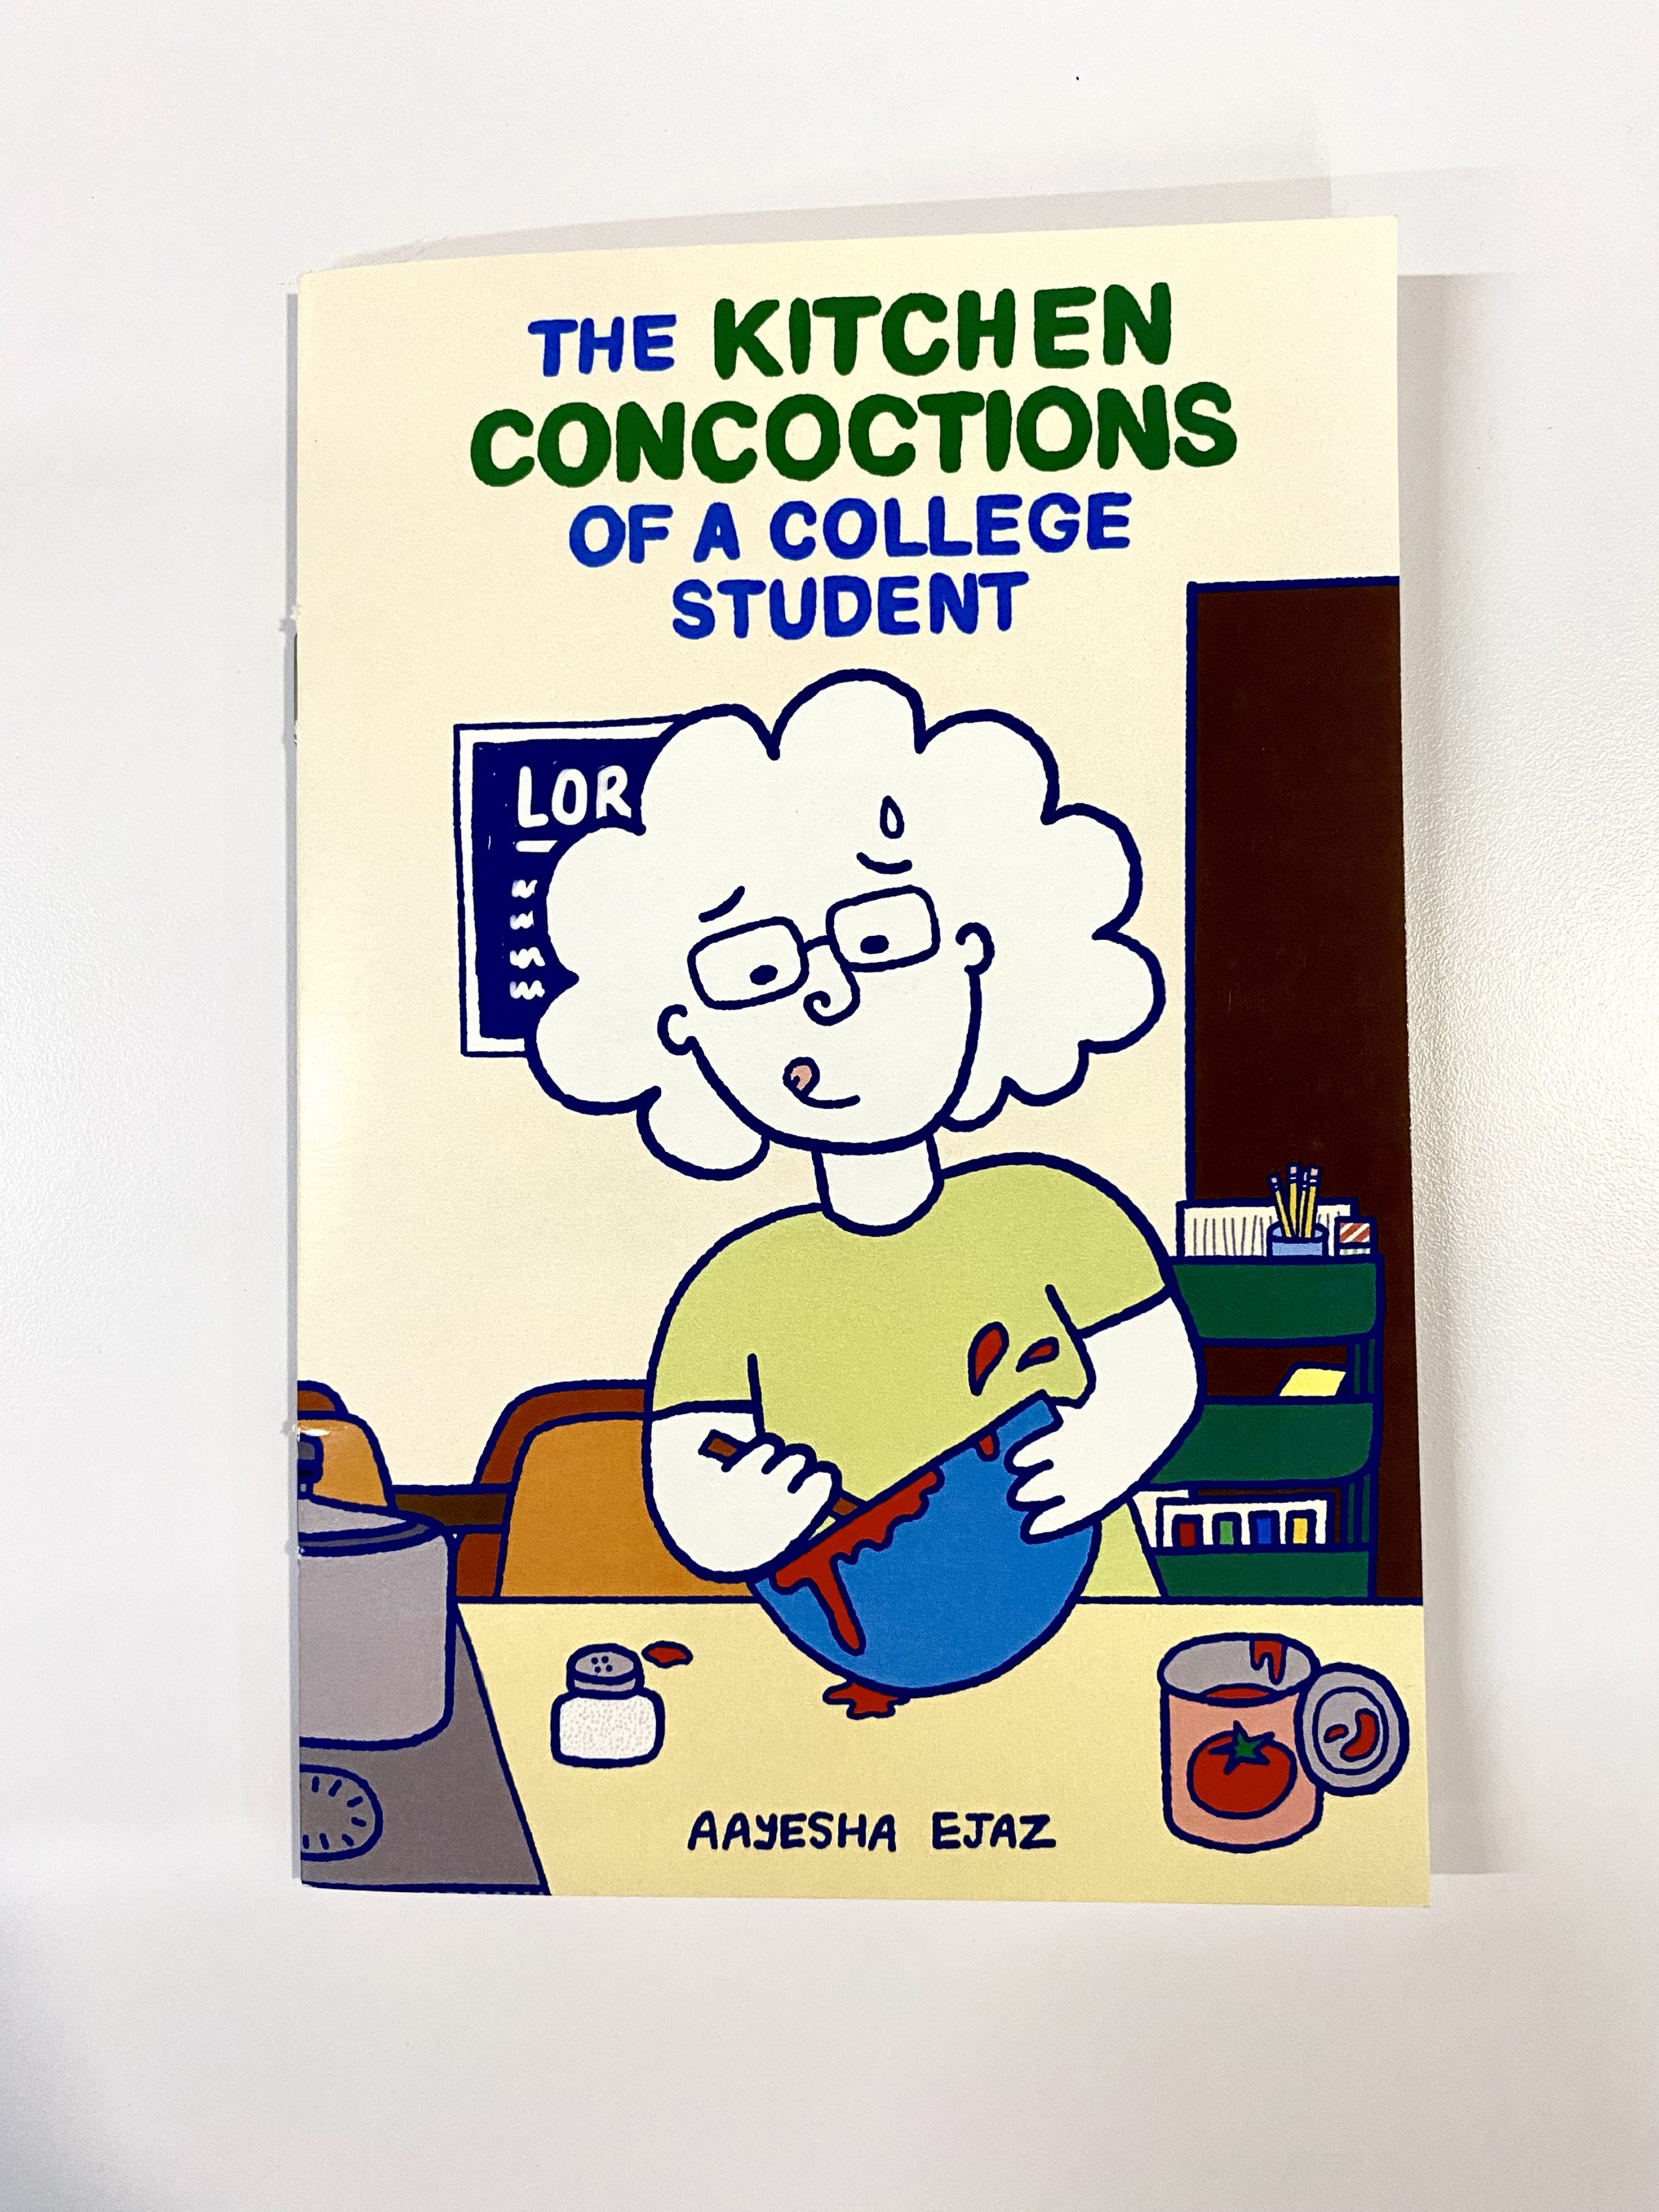 The Kitchen Concoctions of a College Student book cover